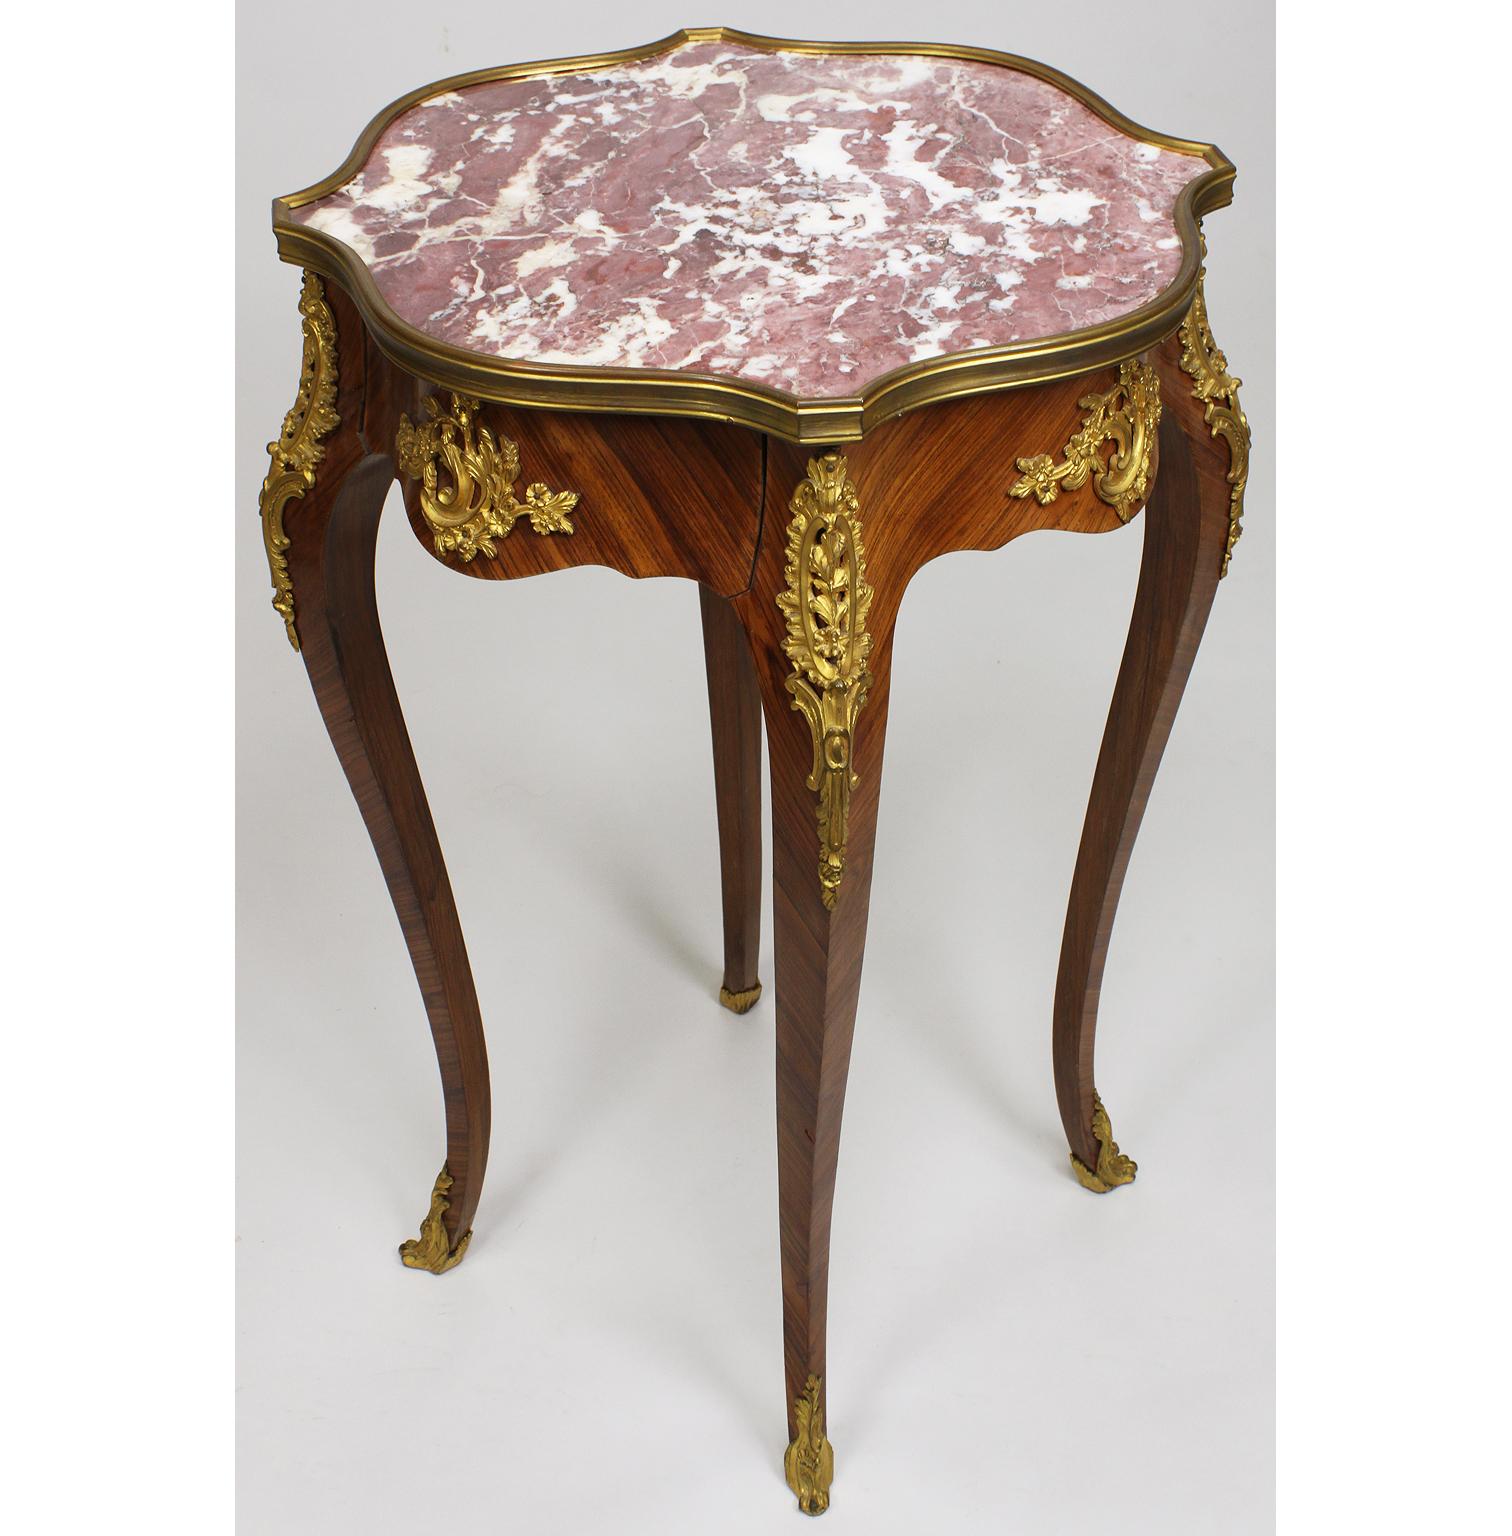 A very Fine French 19th century Louis XV style kingwood and ormolu-mounted marble top gueridon side table. The semi-circular single-drawer table fitted with a Rouge Royal marble top surmounted with a gilt bronze trim raised on four cabriolet legs